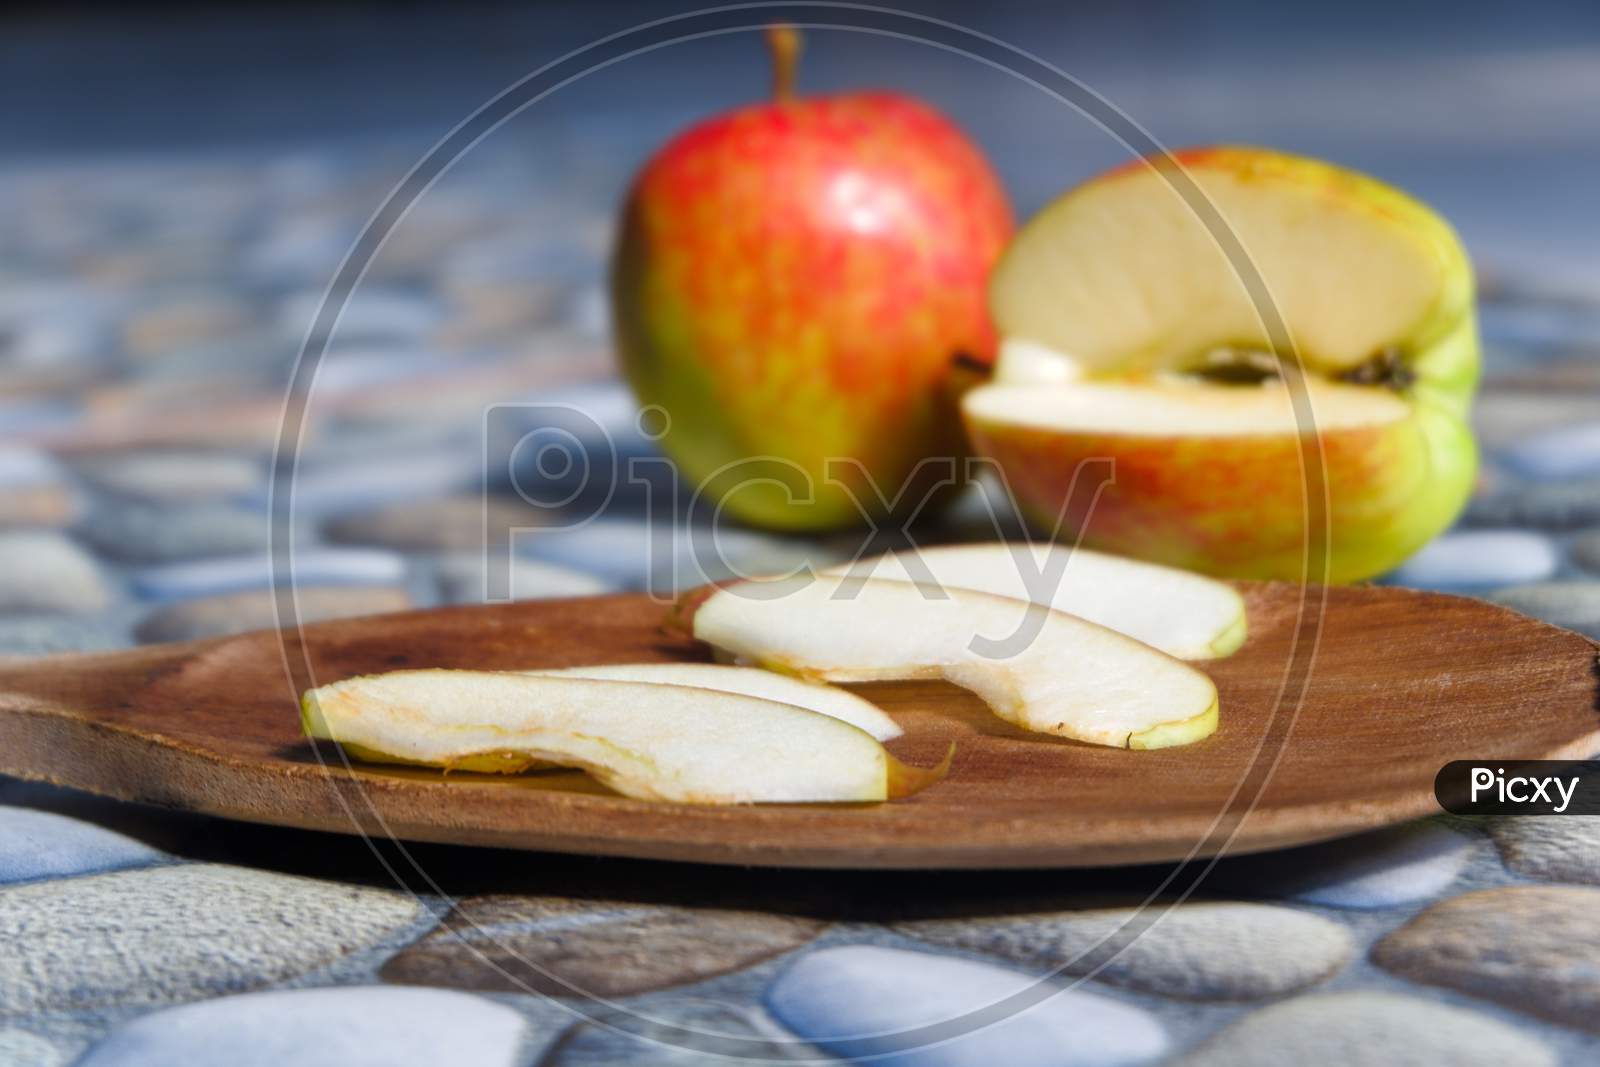 Photos Of Apples In Various Styles, Some Are Still Intact, Some Are Cut With A Stone Background